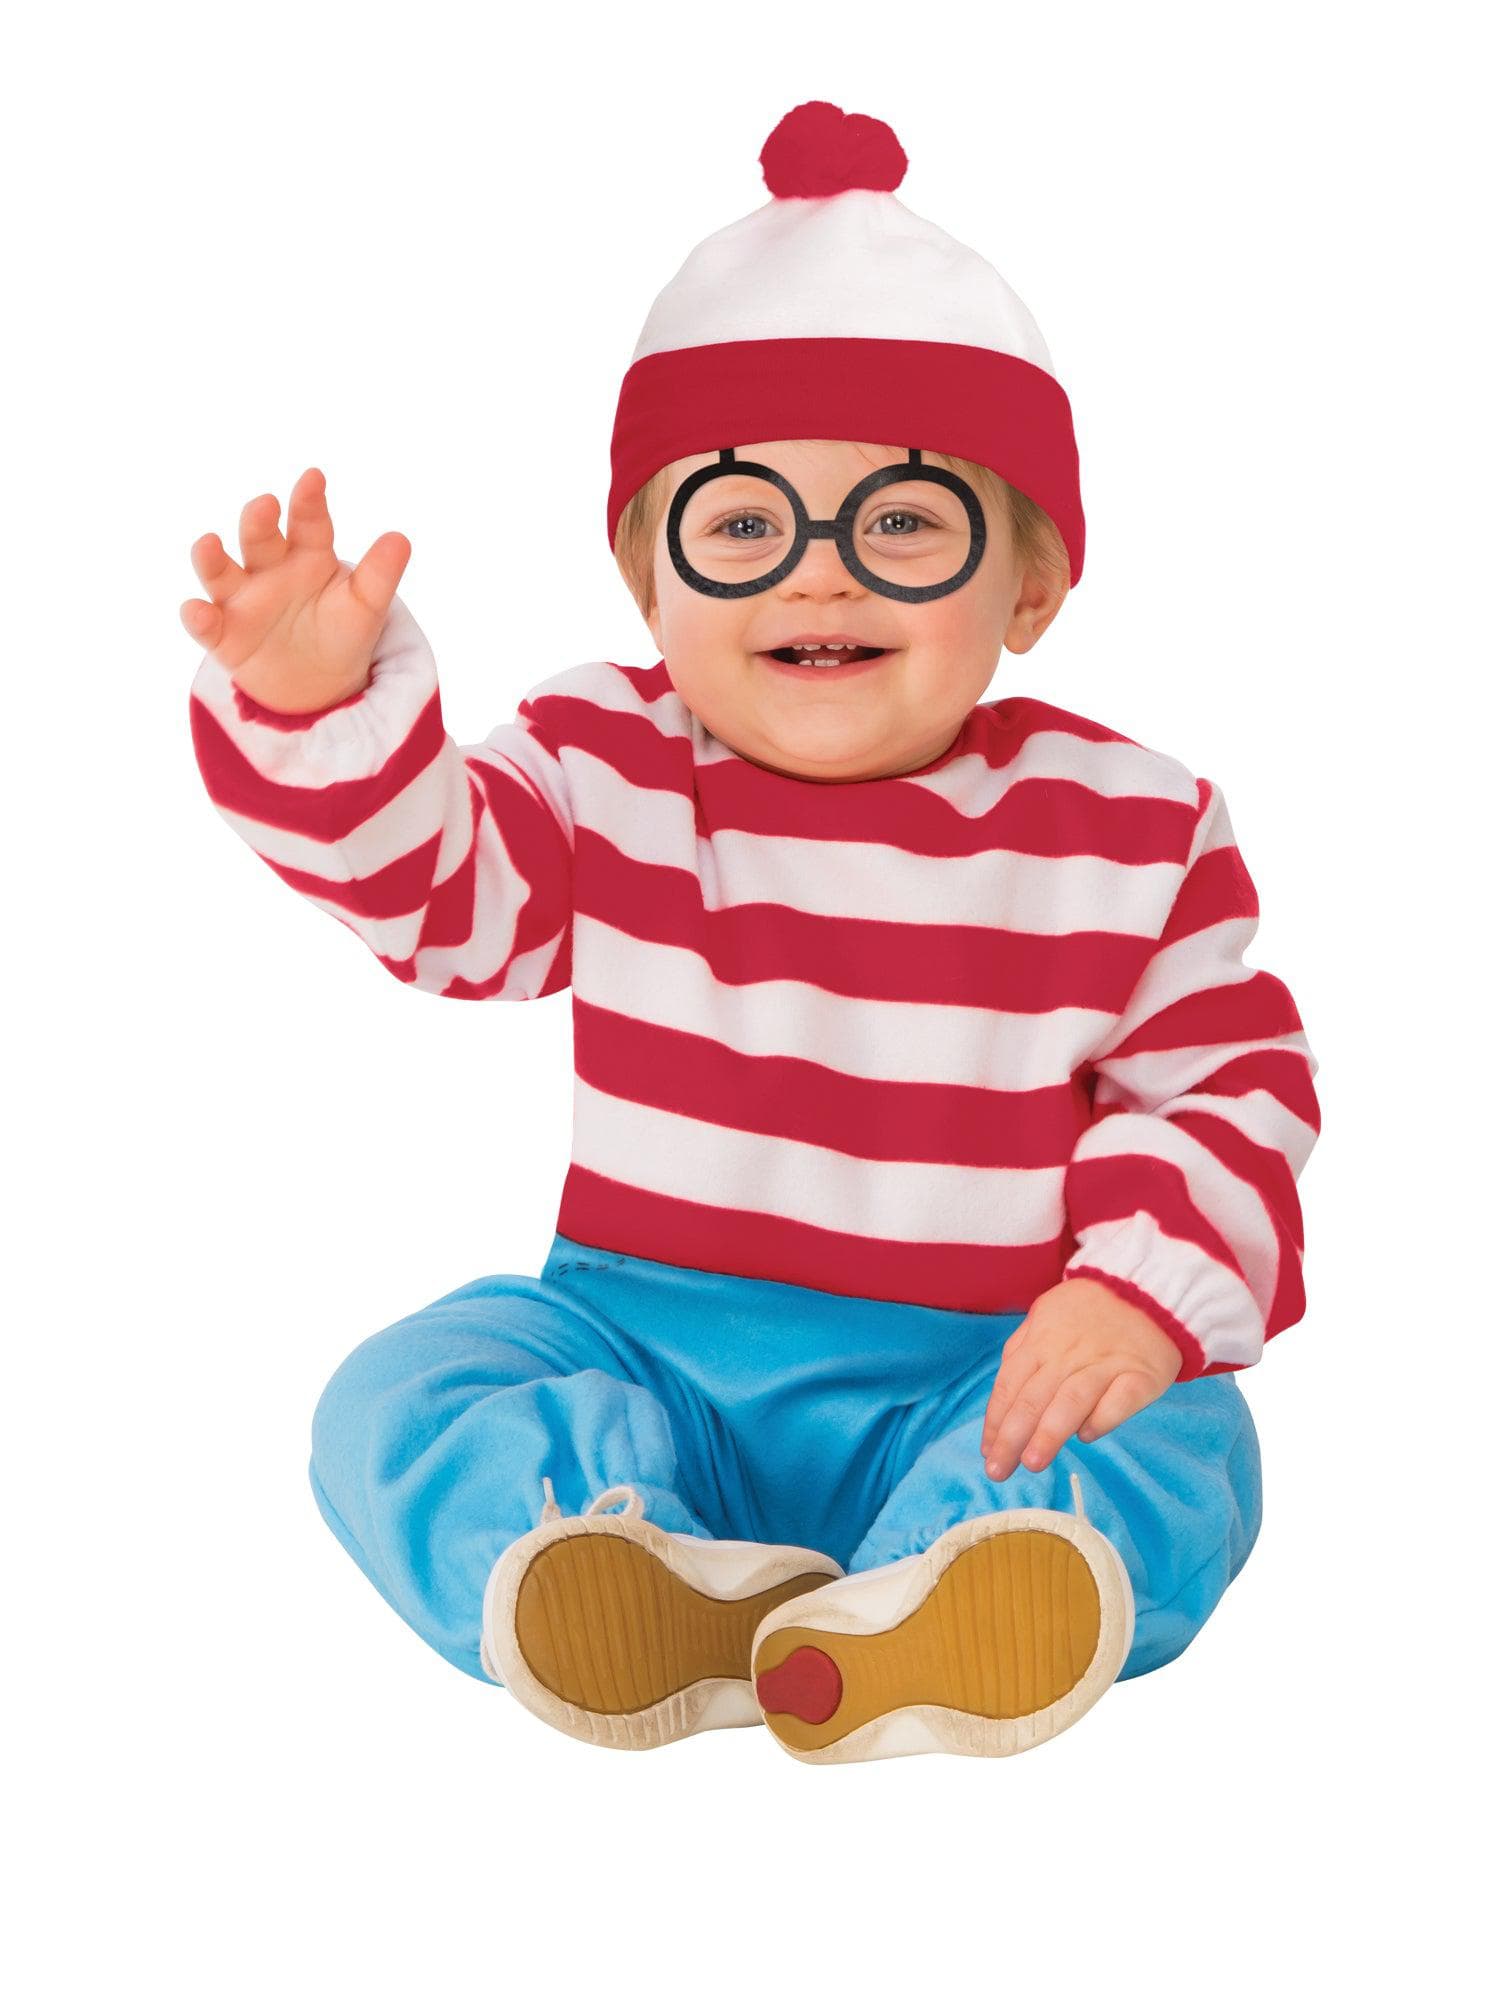 Where's Waldo Jumpsuit Costume for Toddlers - costumes.com